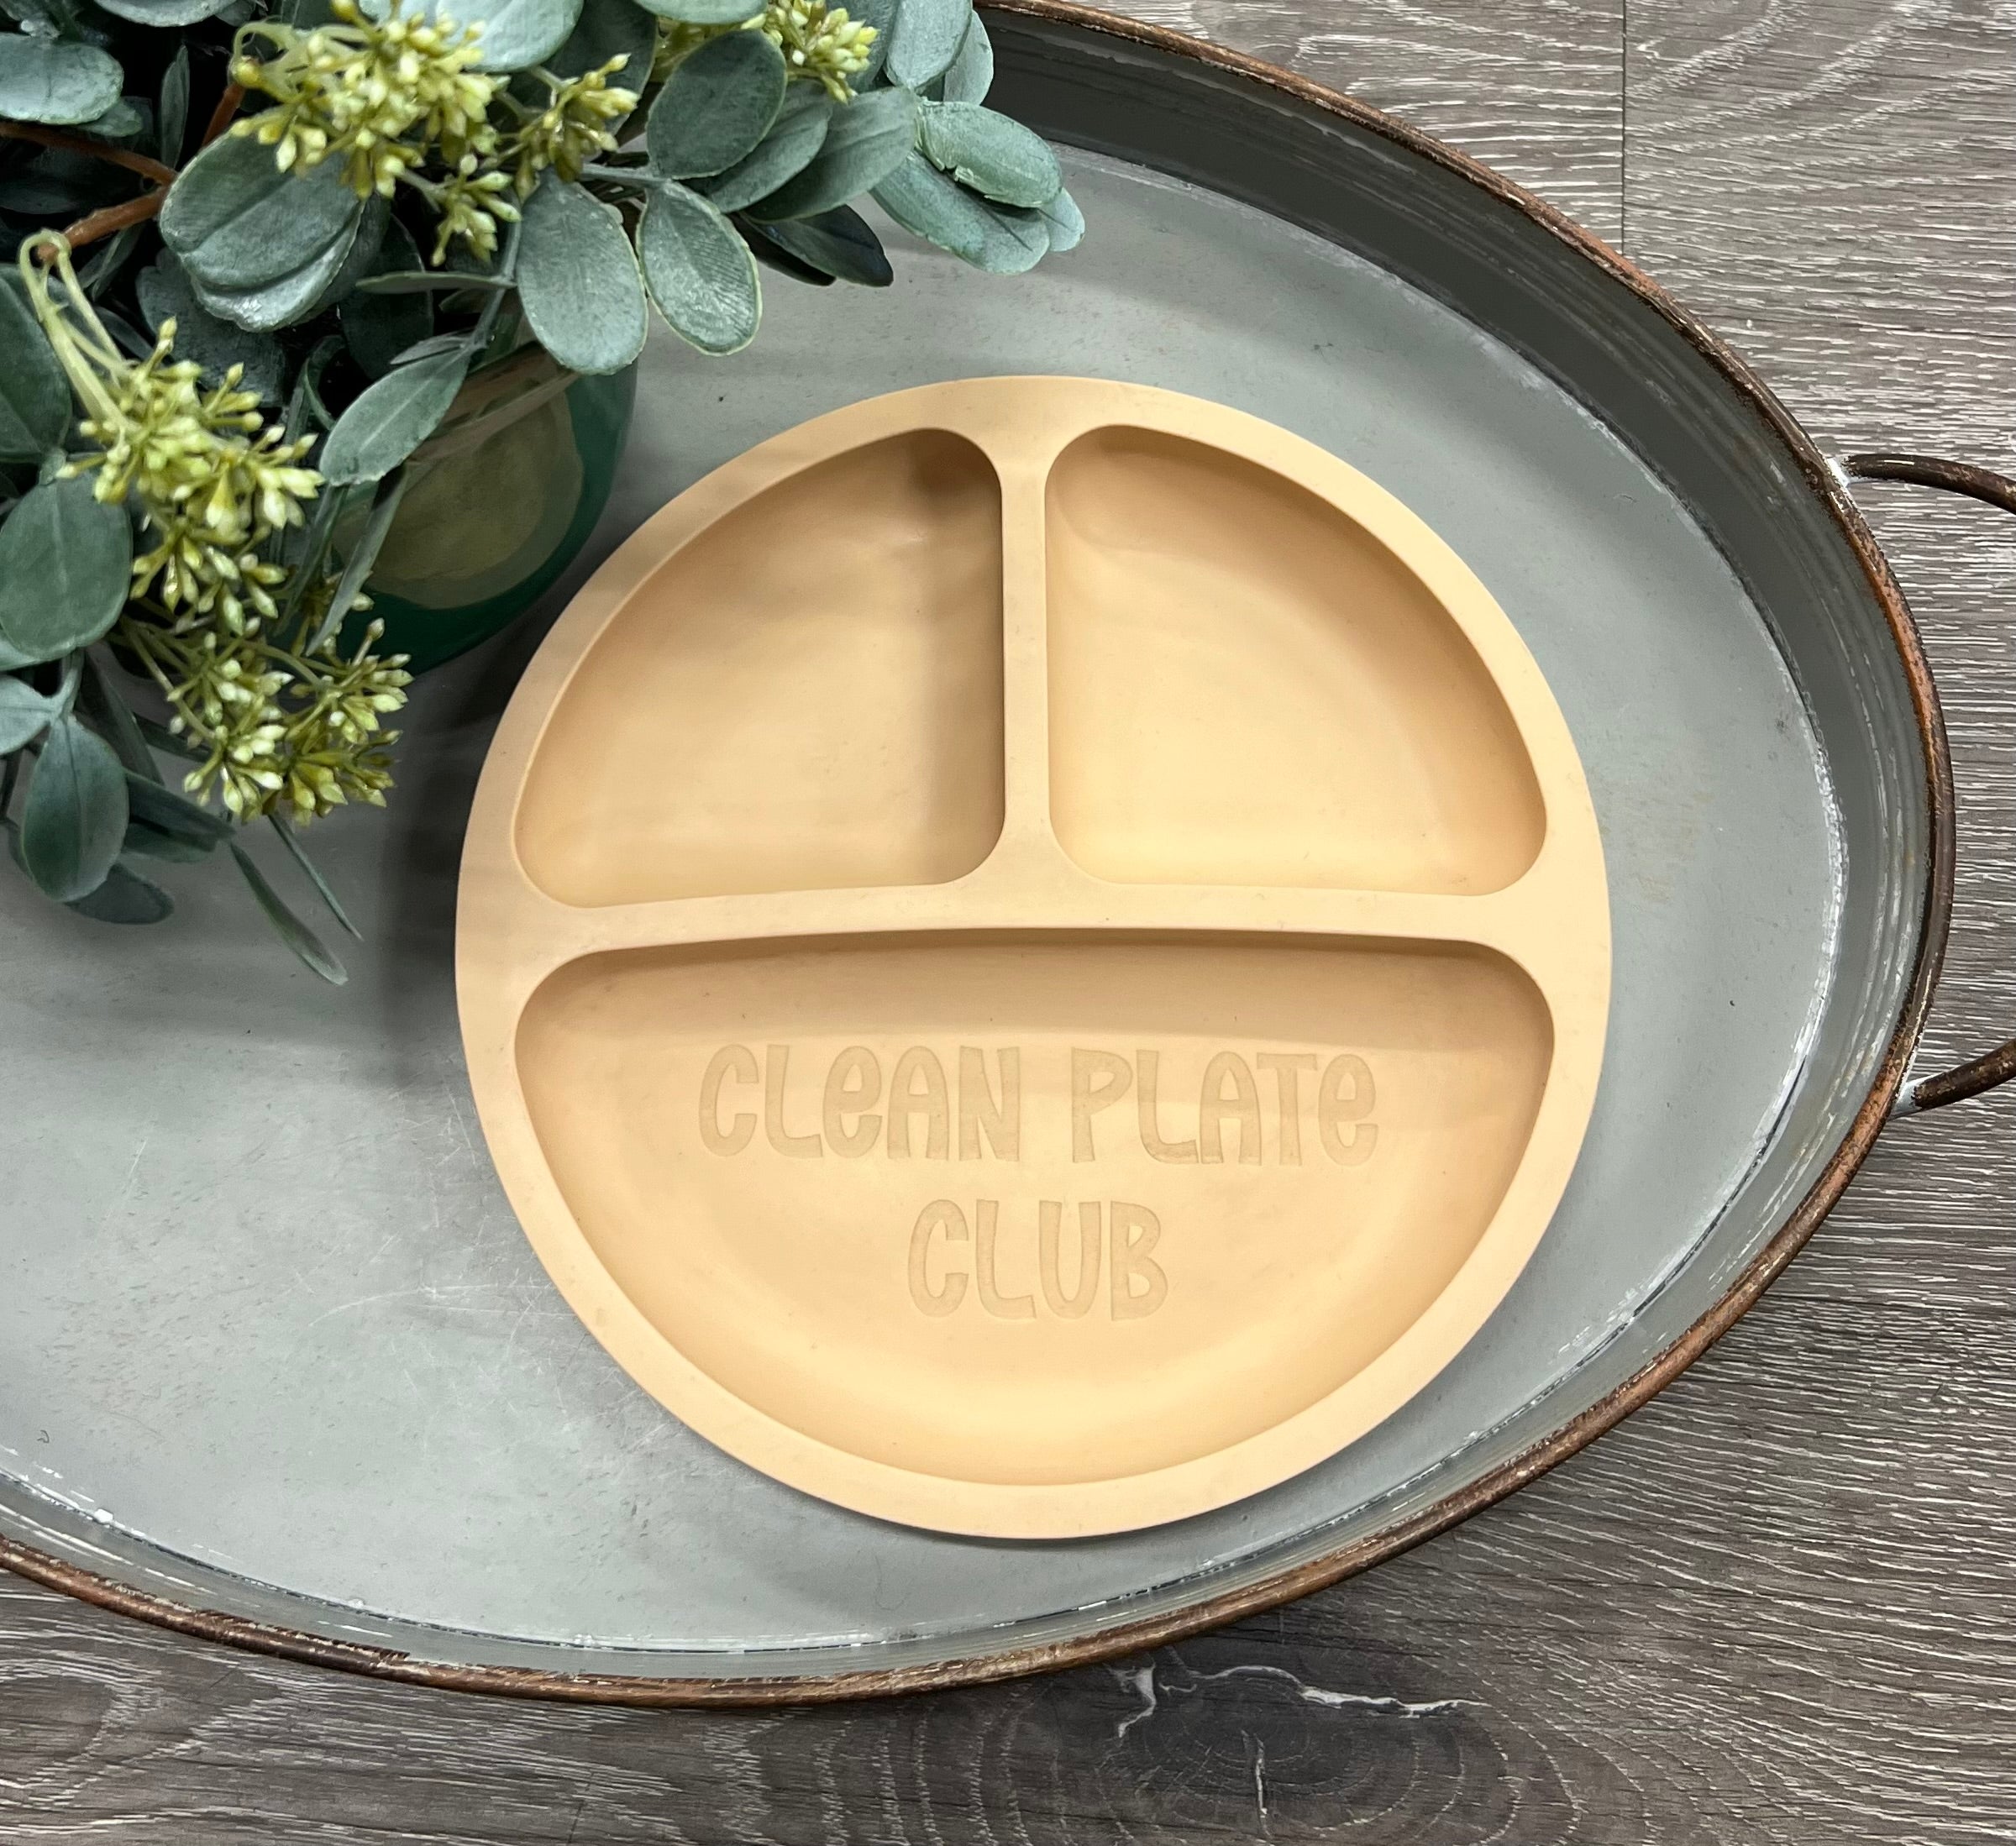 Silicone Kids Plate “Clean Plate Club”